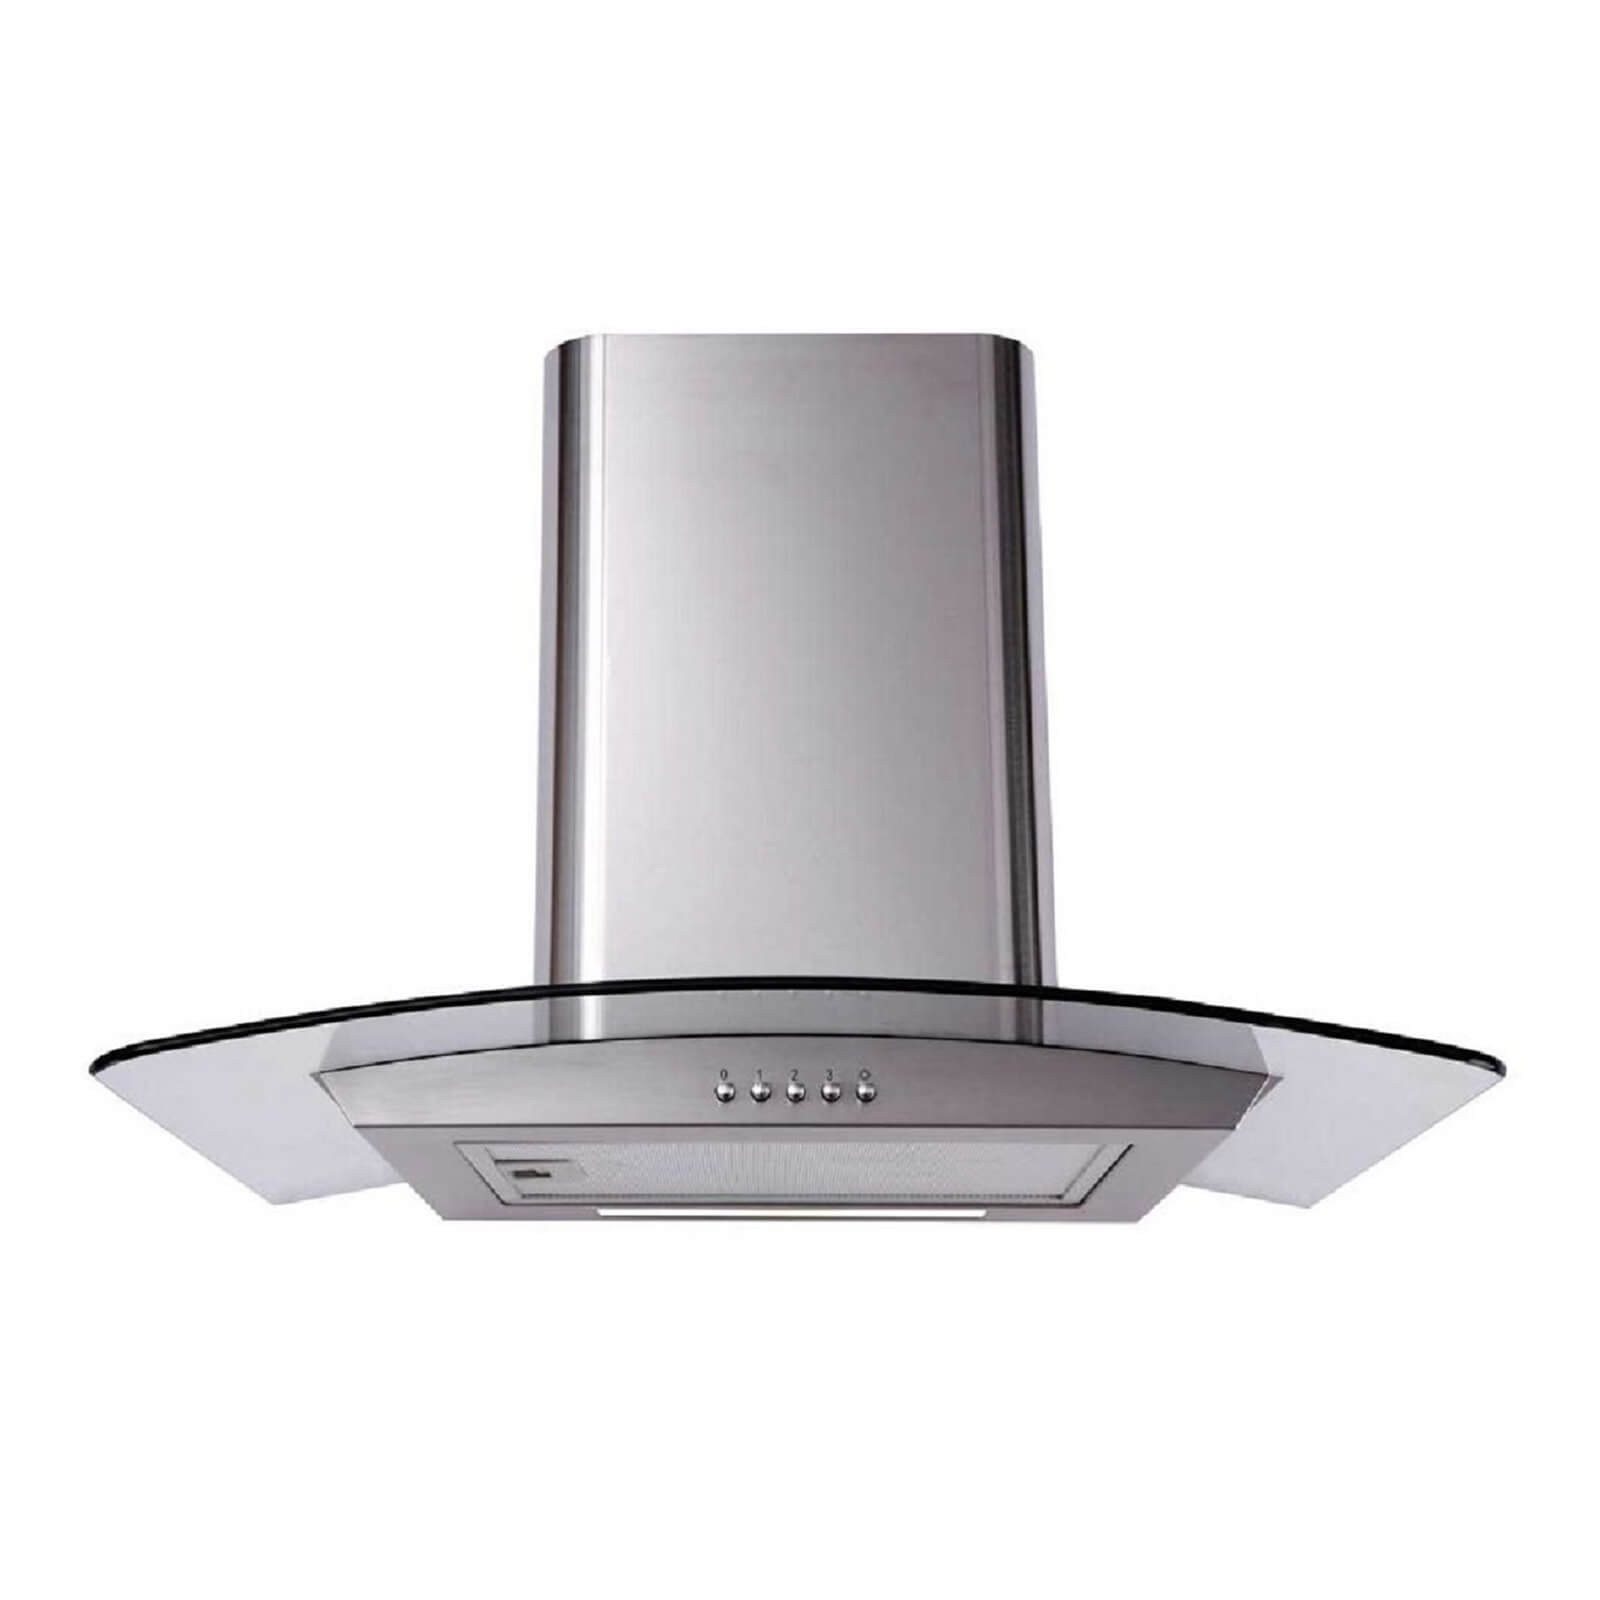 Matrix MEP601SS Curved Glass Chimney Cooker Hood - 60cm - Stainless Steel